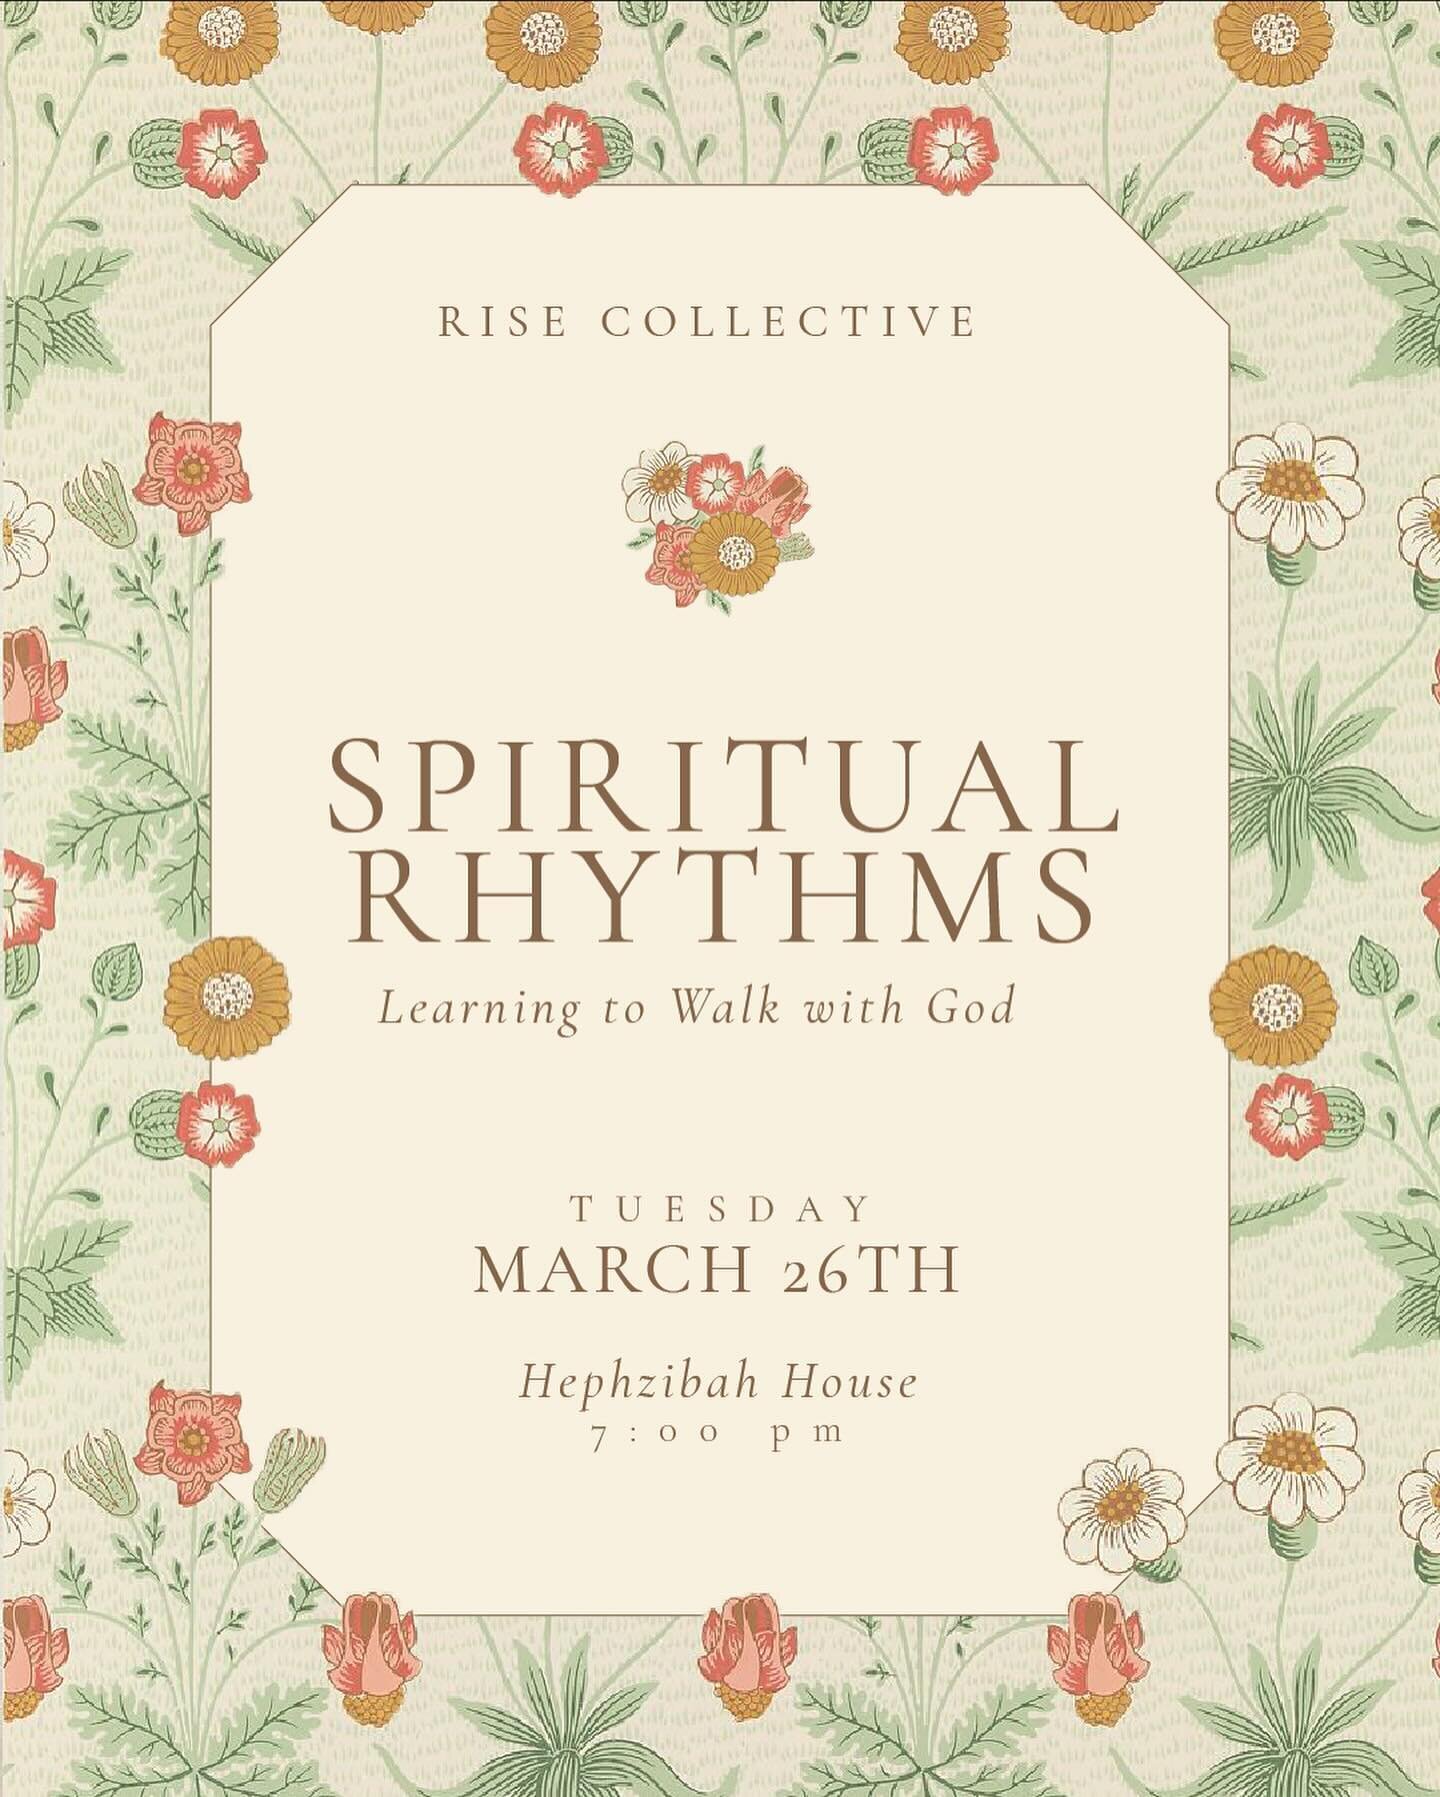 Join us for our second Spiritual Mothers gathering at Hephzibah House on March 26th at 7:00 pm!

We are going to dive into spiritual rhythms as followers of Jesus. What does it mean to walk closely with the Lord? How can we cultivate habits in our da